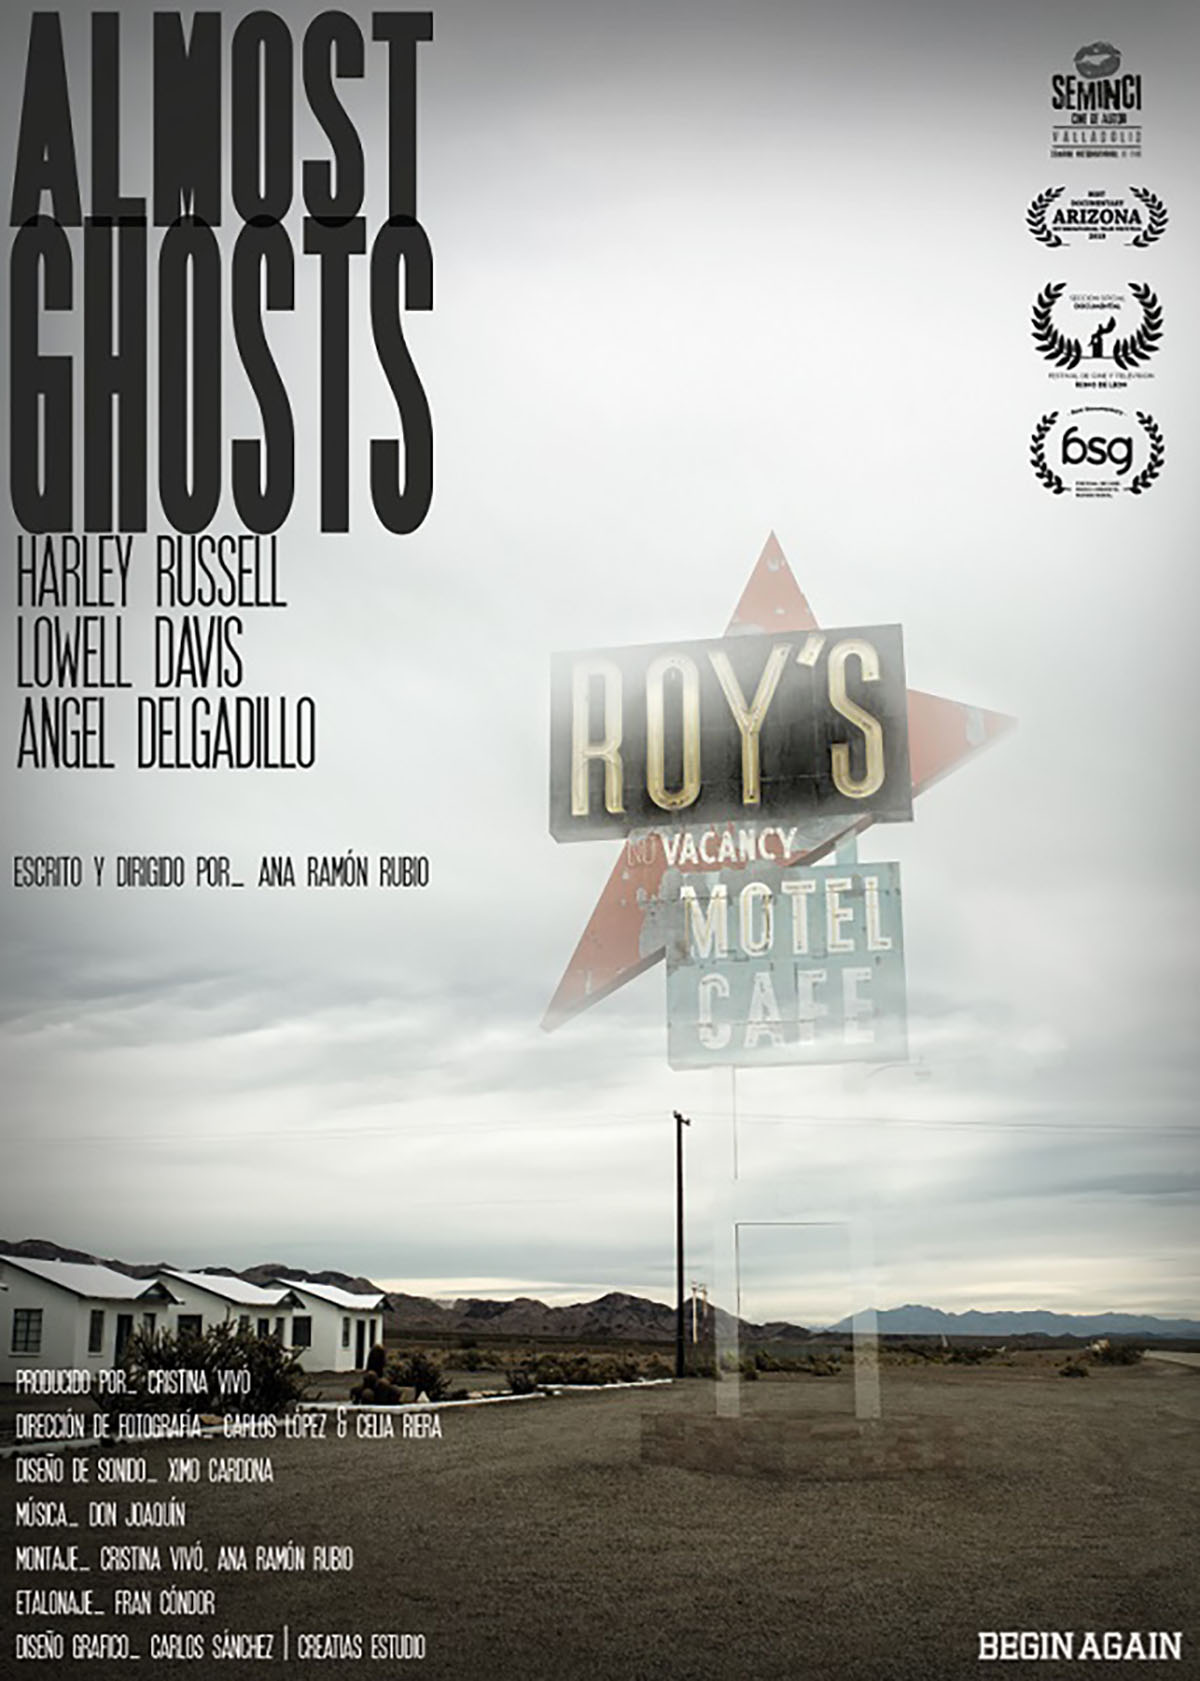 Crítica: ‘Almost ghosts’